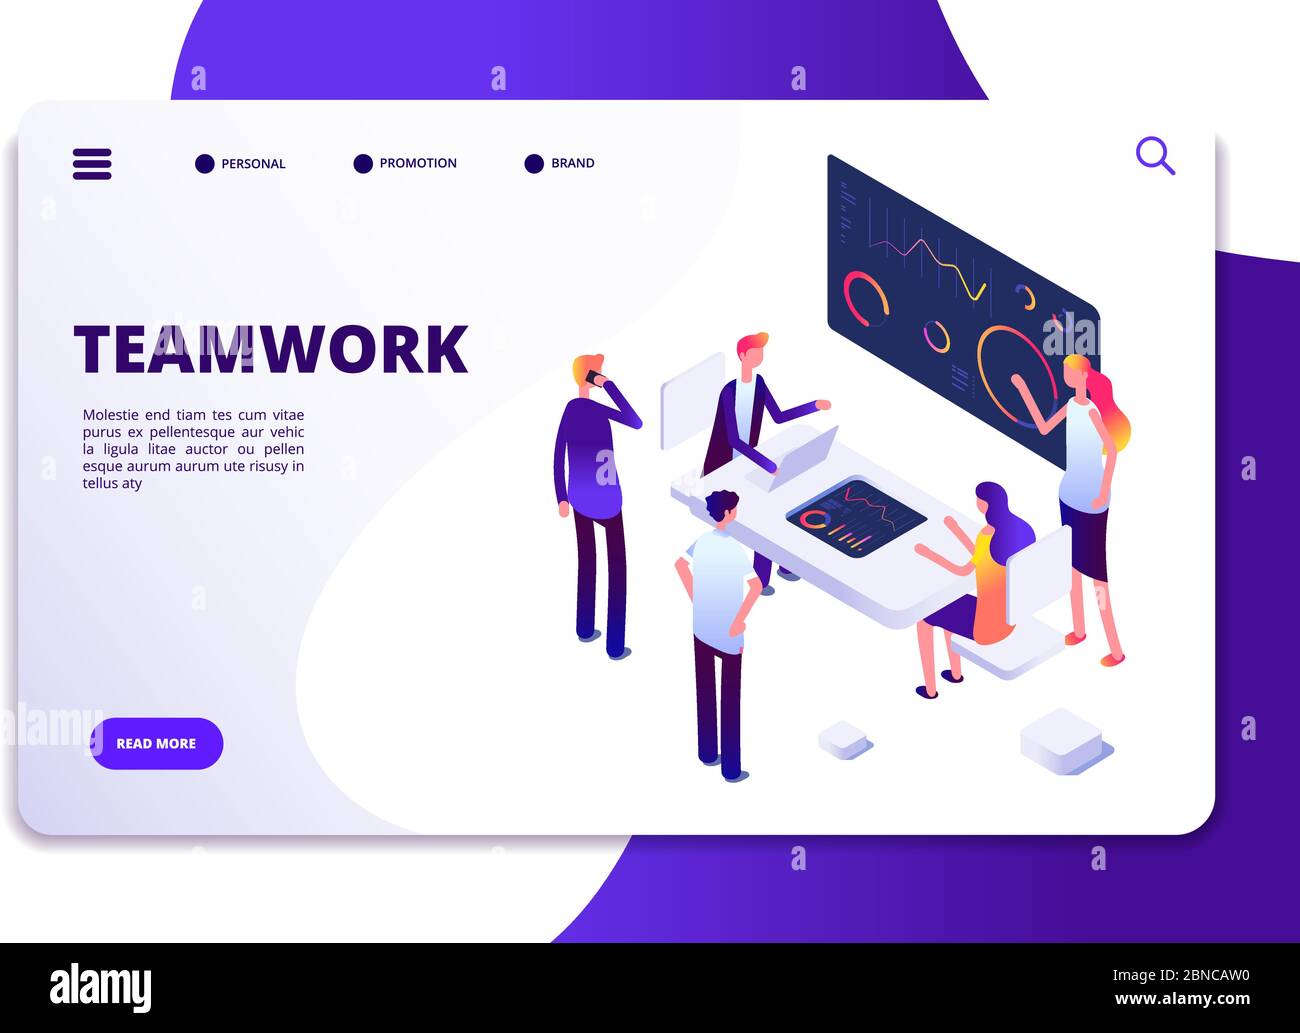 Teamwork isometric landing page. Cartoon business people working at office desk with computers. Business workspace vector concept. Illustration of teamwork page and 3d team characters Stock Vector